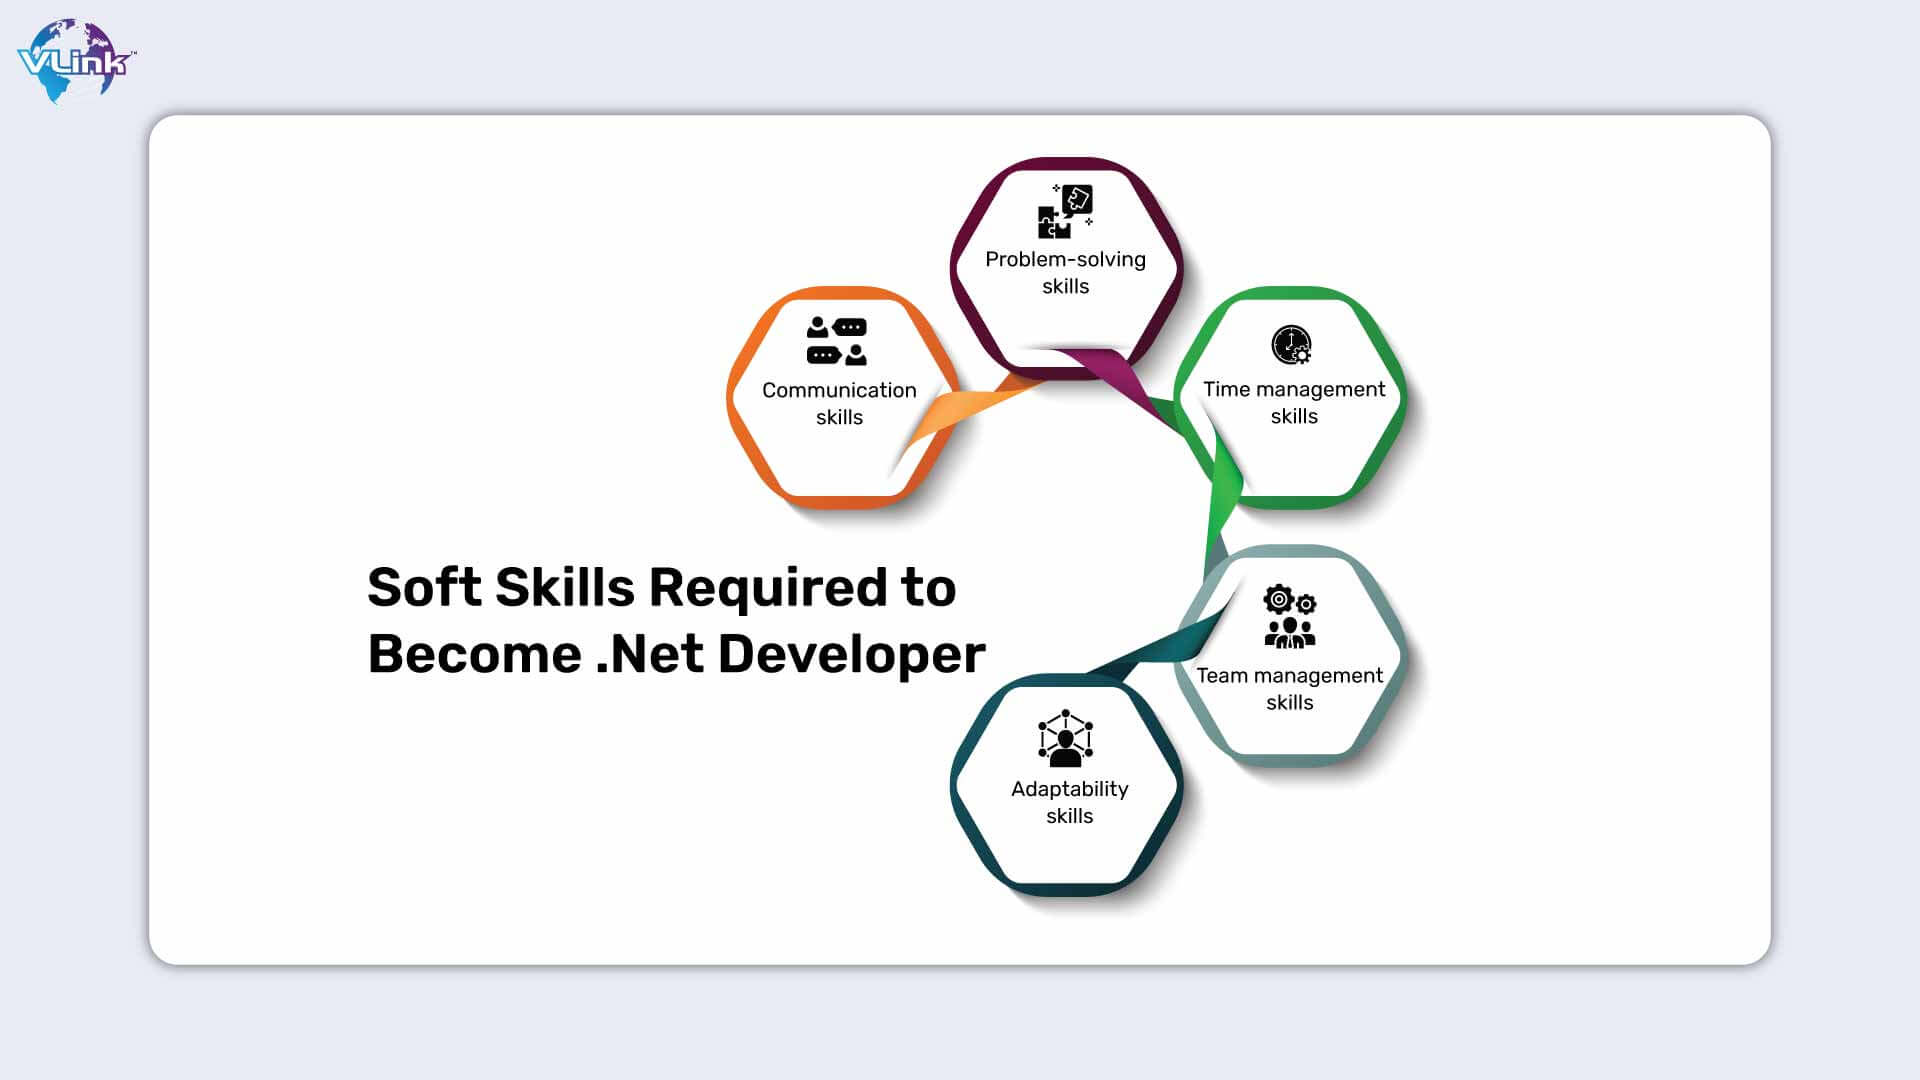 Soft Skills Required to Become a .Net Developer